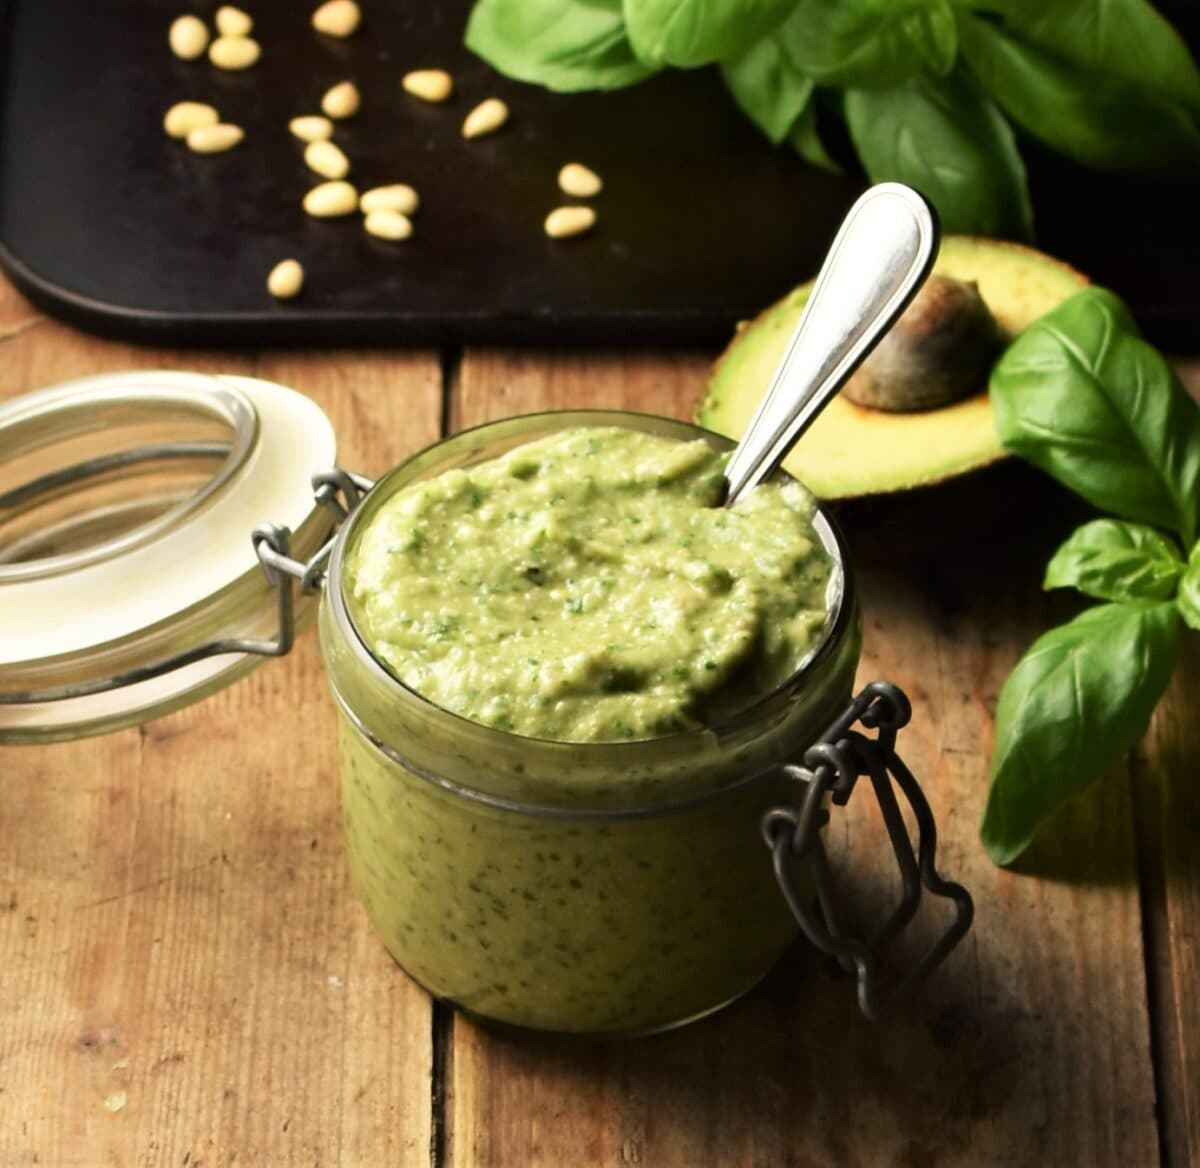 Side view of avocado pesto in jar with spoon, avocado, basil and pine nuts in background.